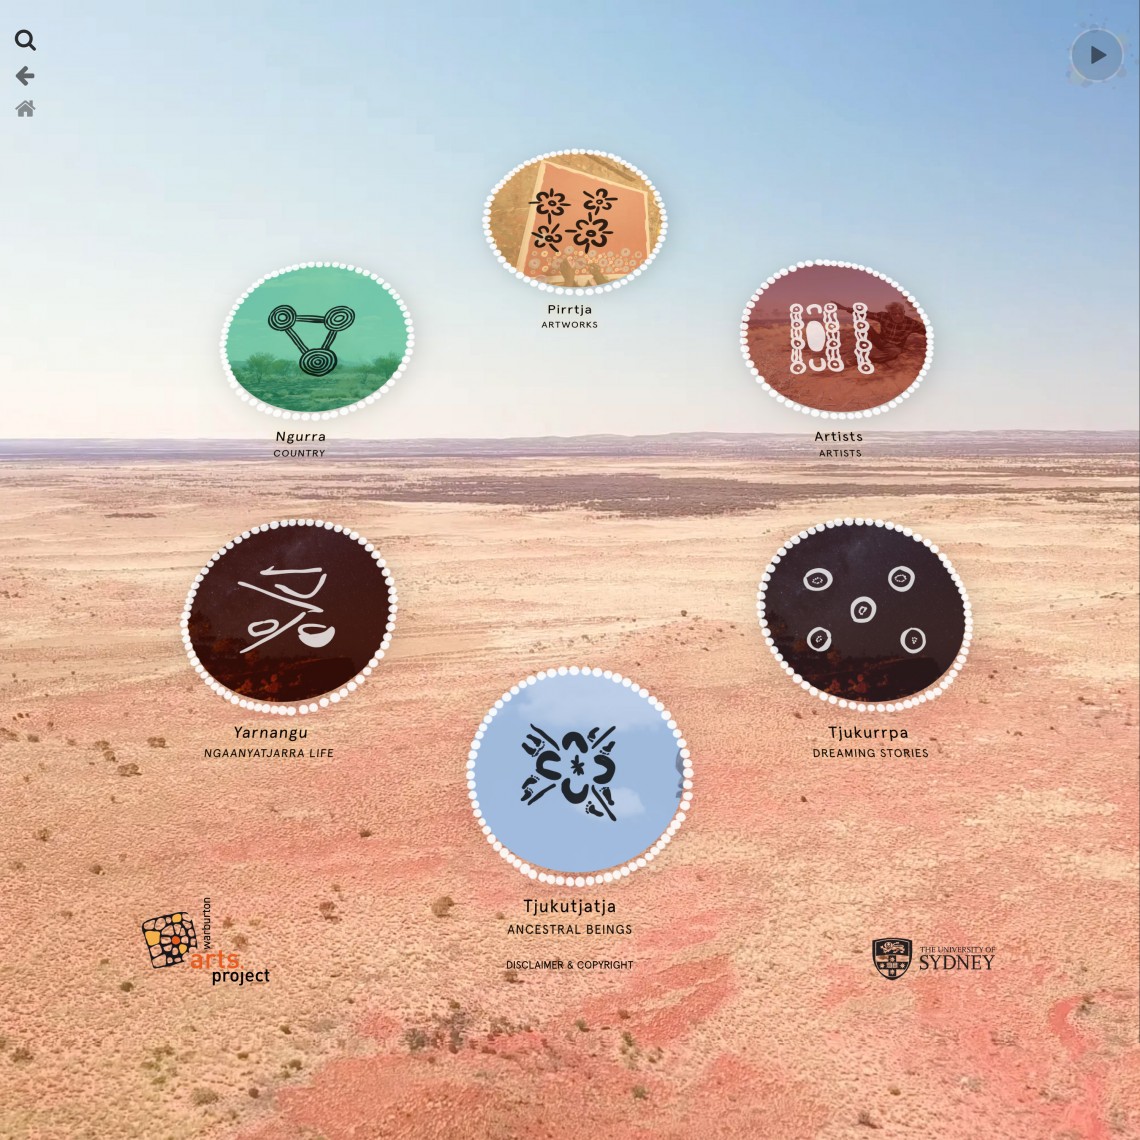 Landing page showing icons and an aerial landscape towards Warburton